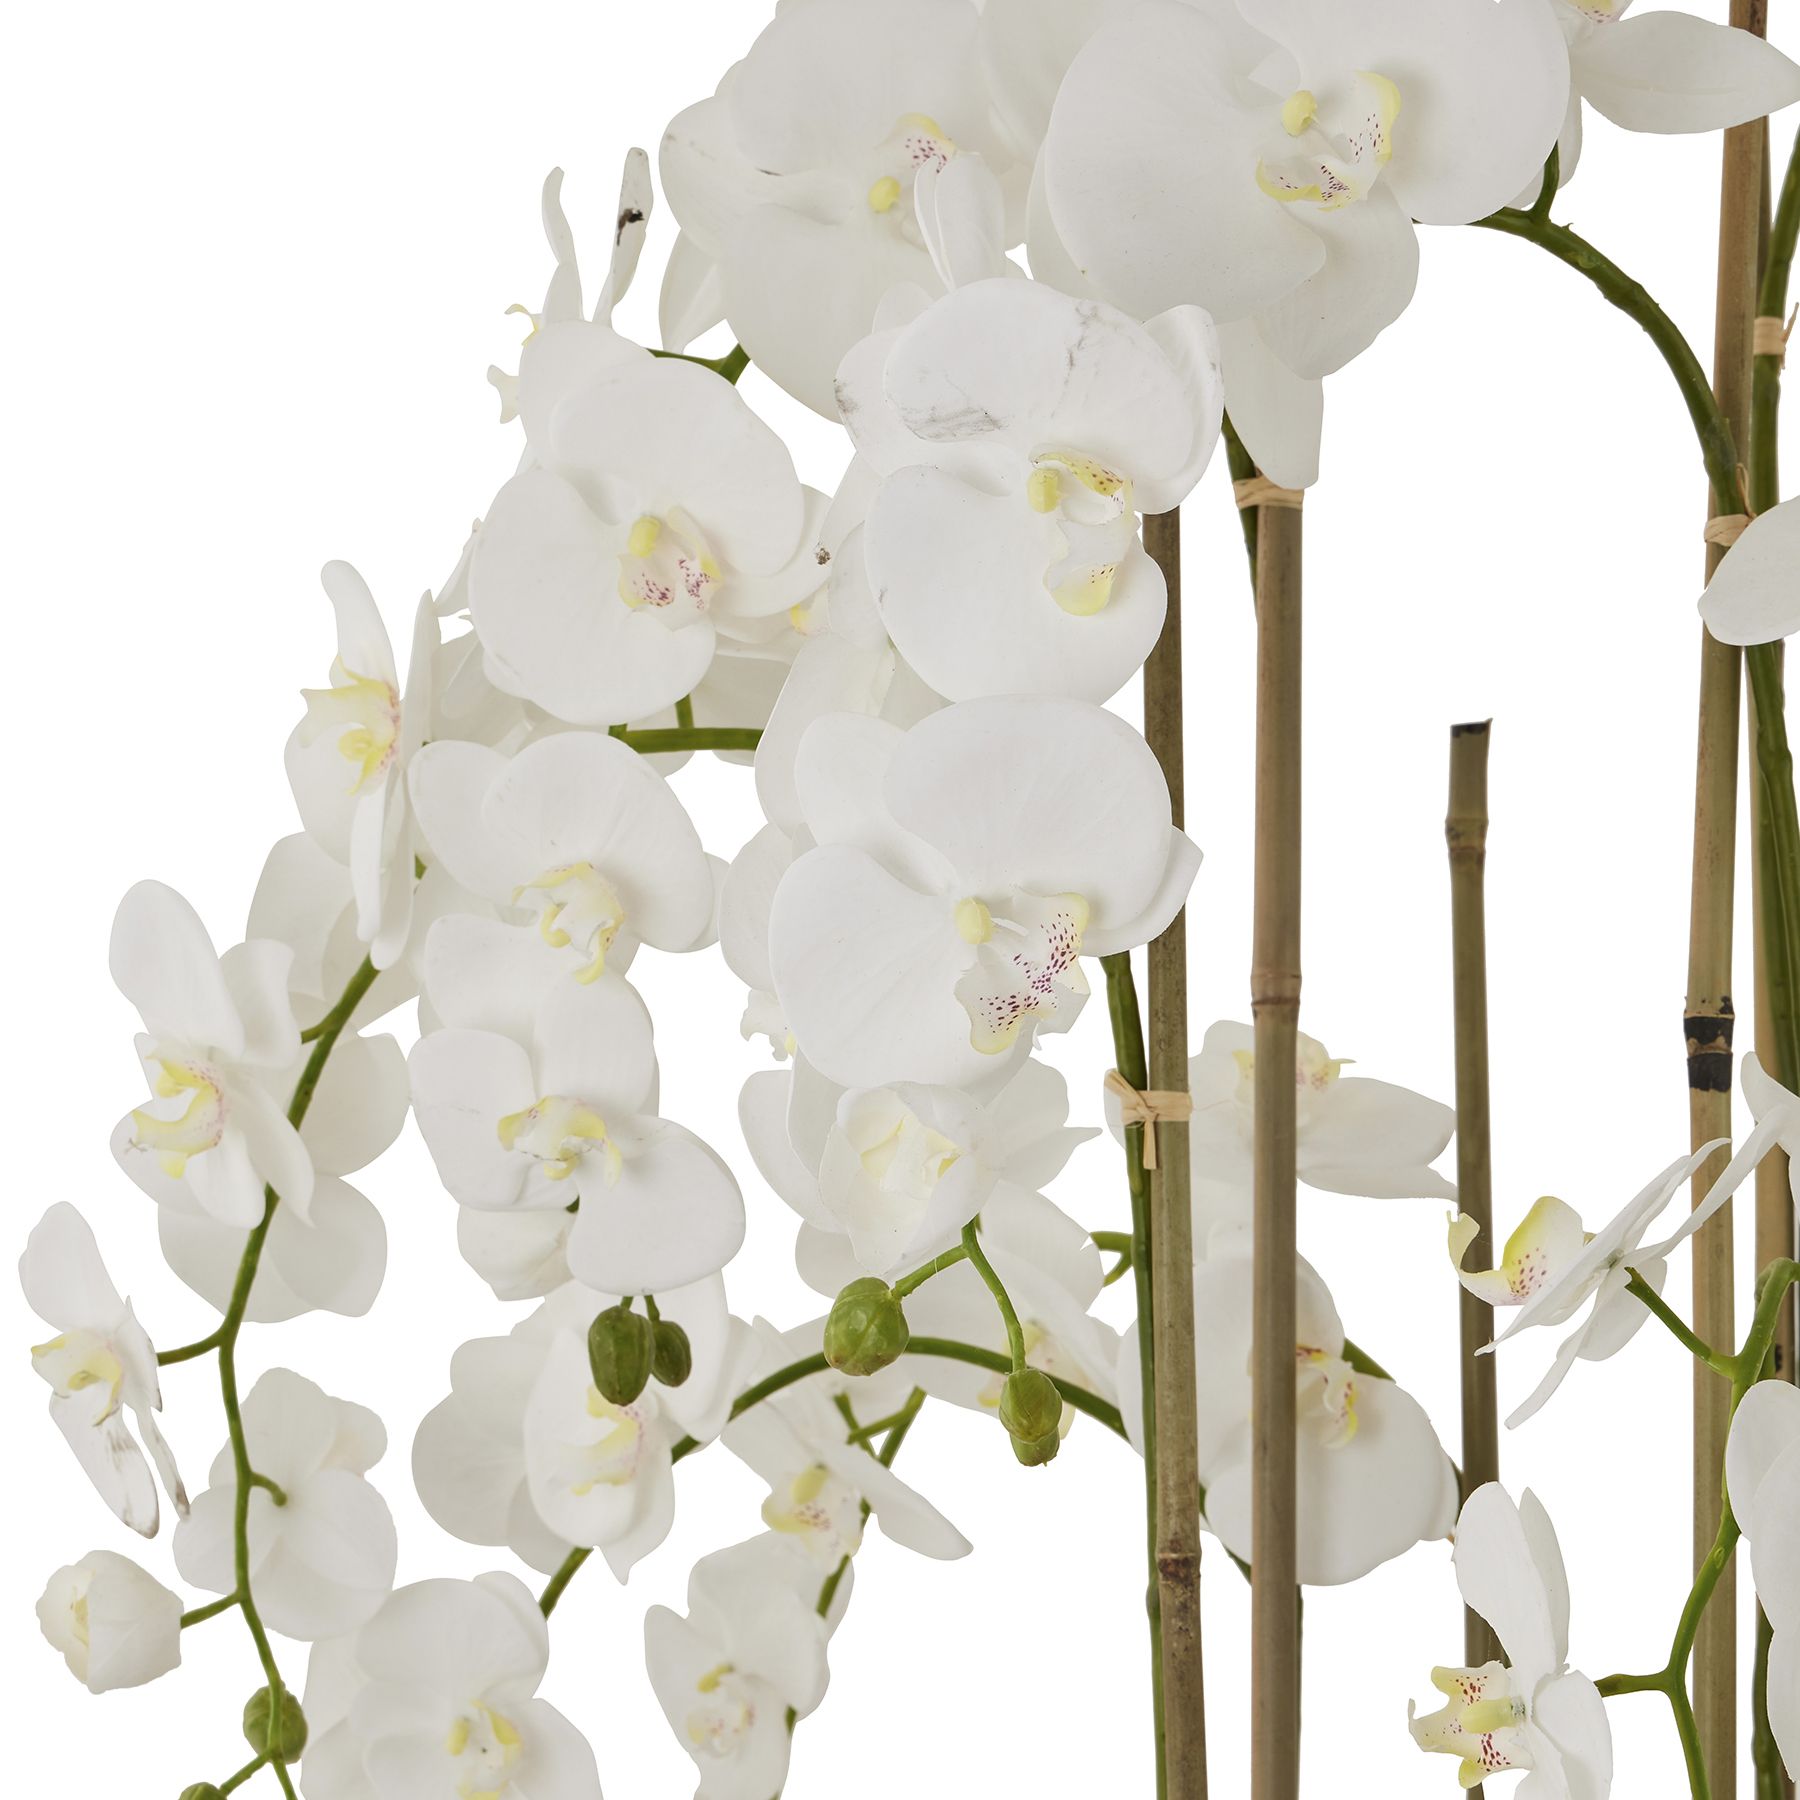 Large White Orchid In Antique Stone Pot - Image 2